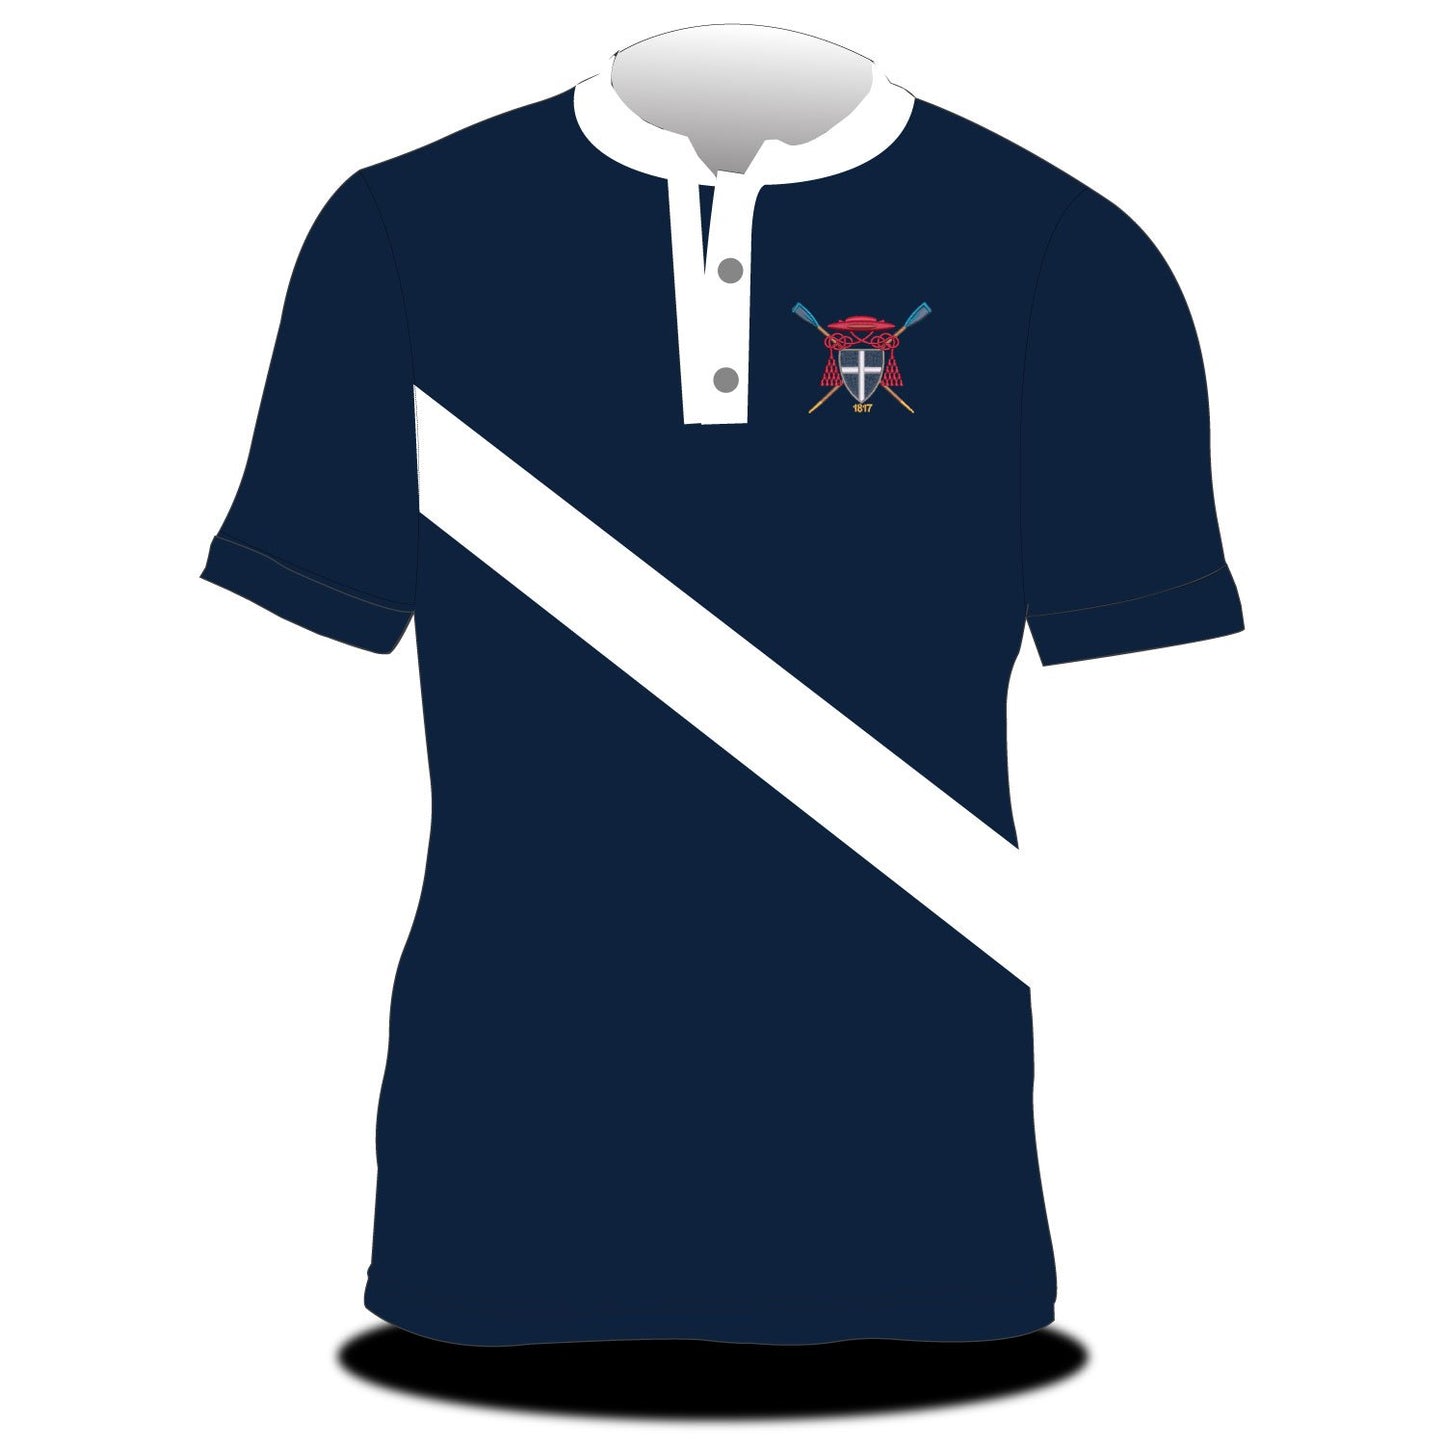 Christ Church College Boat Club Zephyr Navy with White Sash